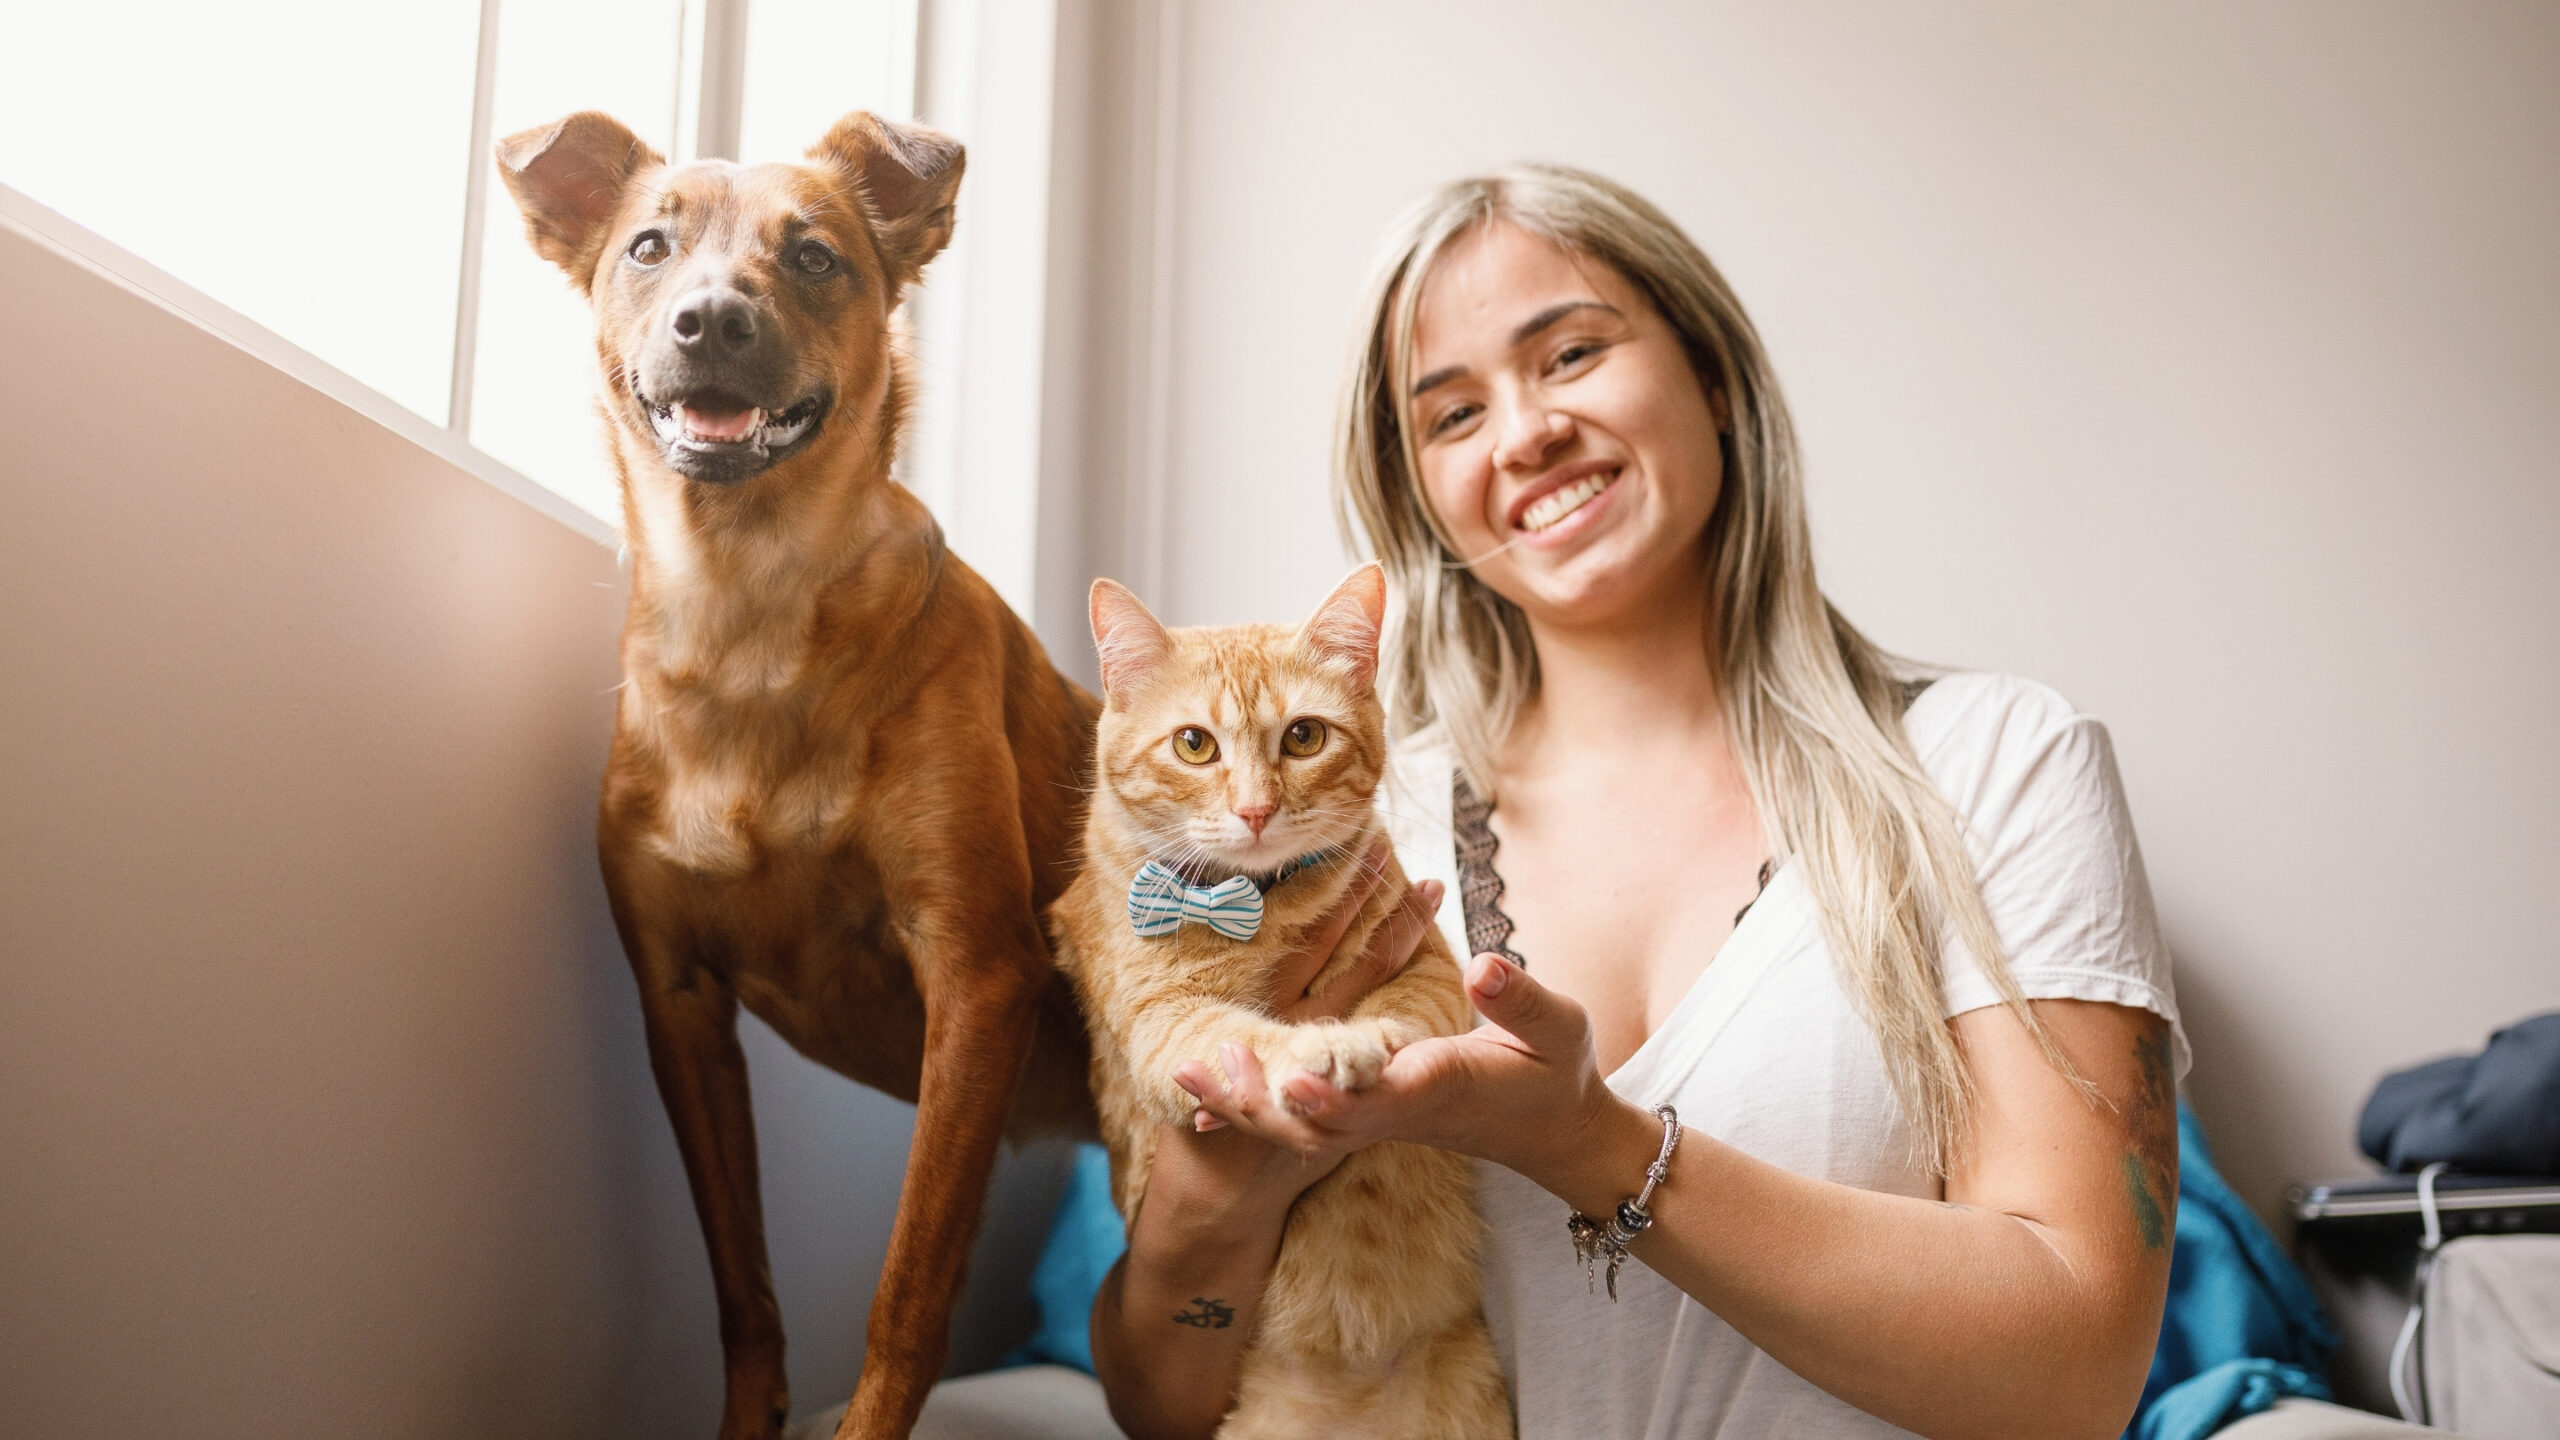 Pets in Rental Properties What Every Landlord Should Know